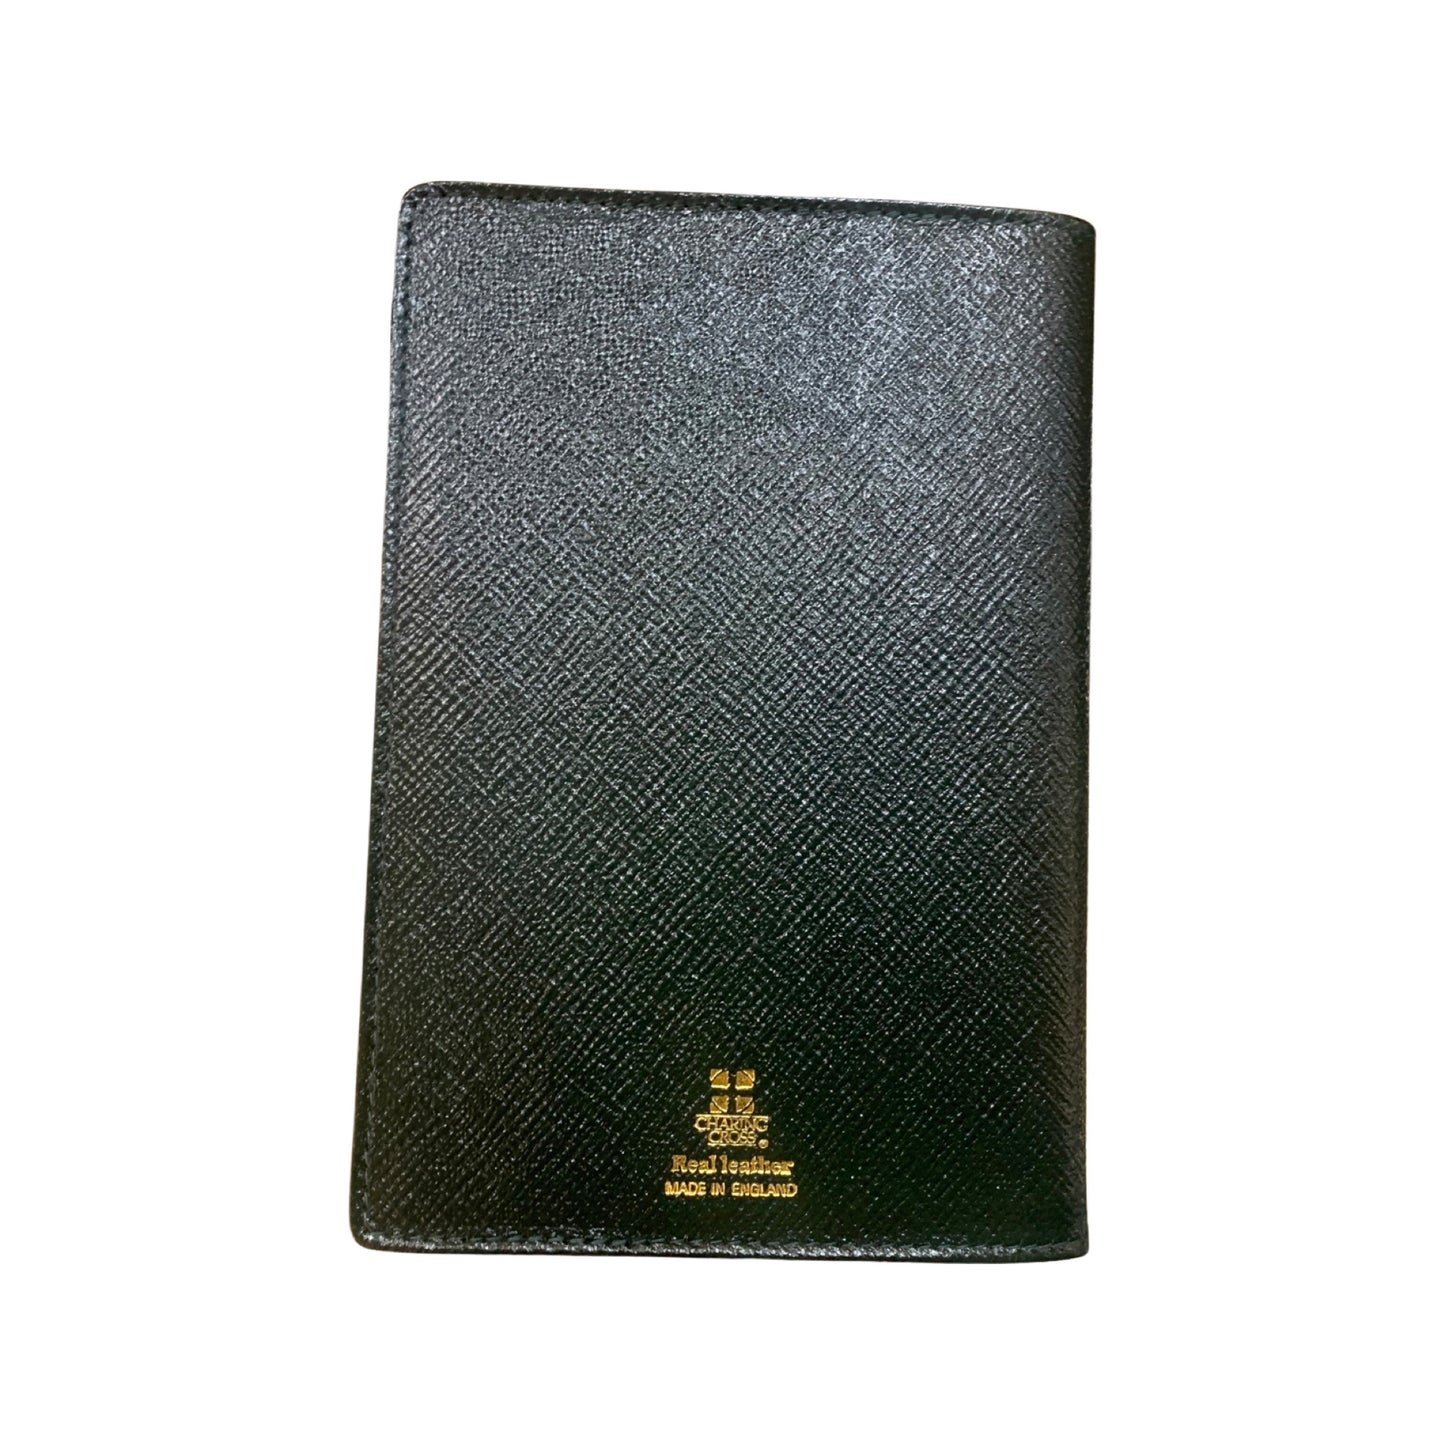 Leather Notebook | 6x4" | Refillable Journal | Crossgrain Leather | N64RL